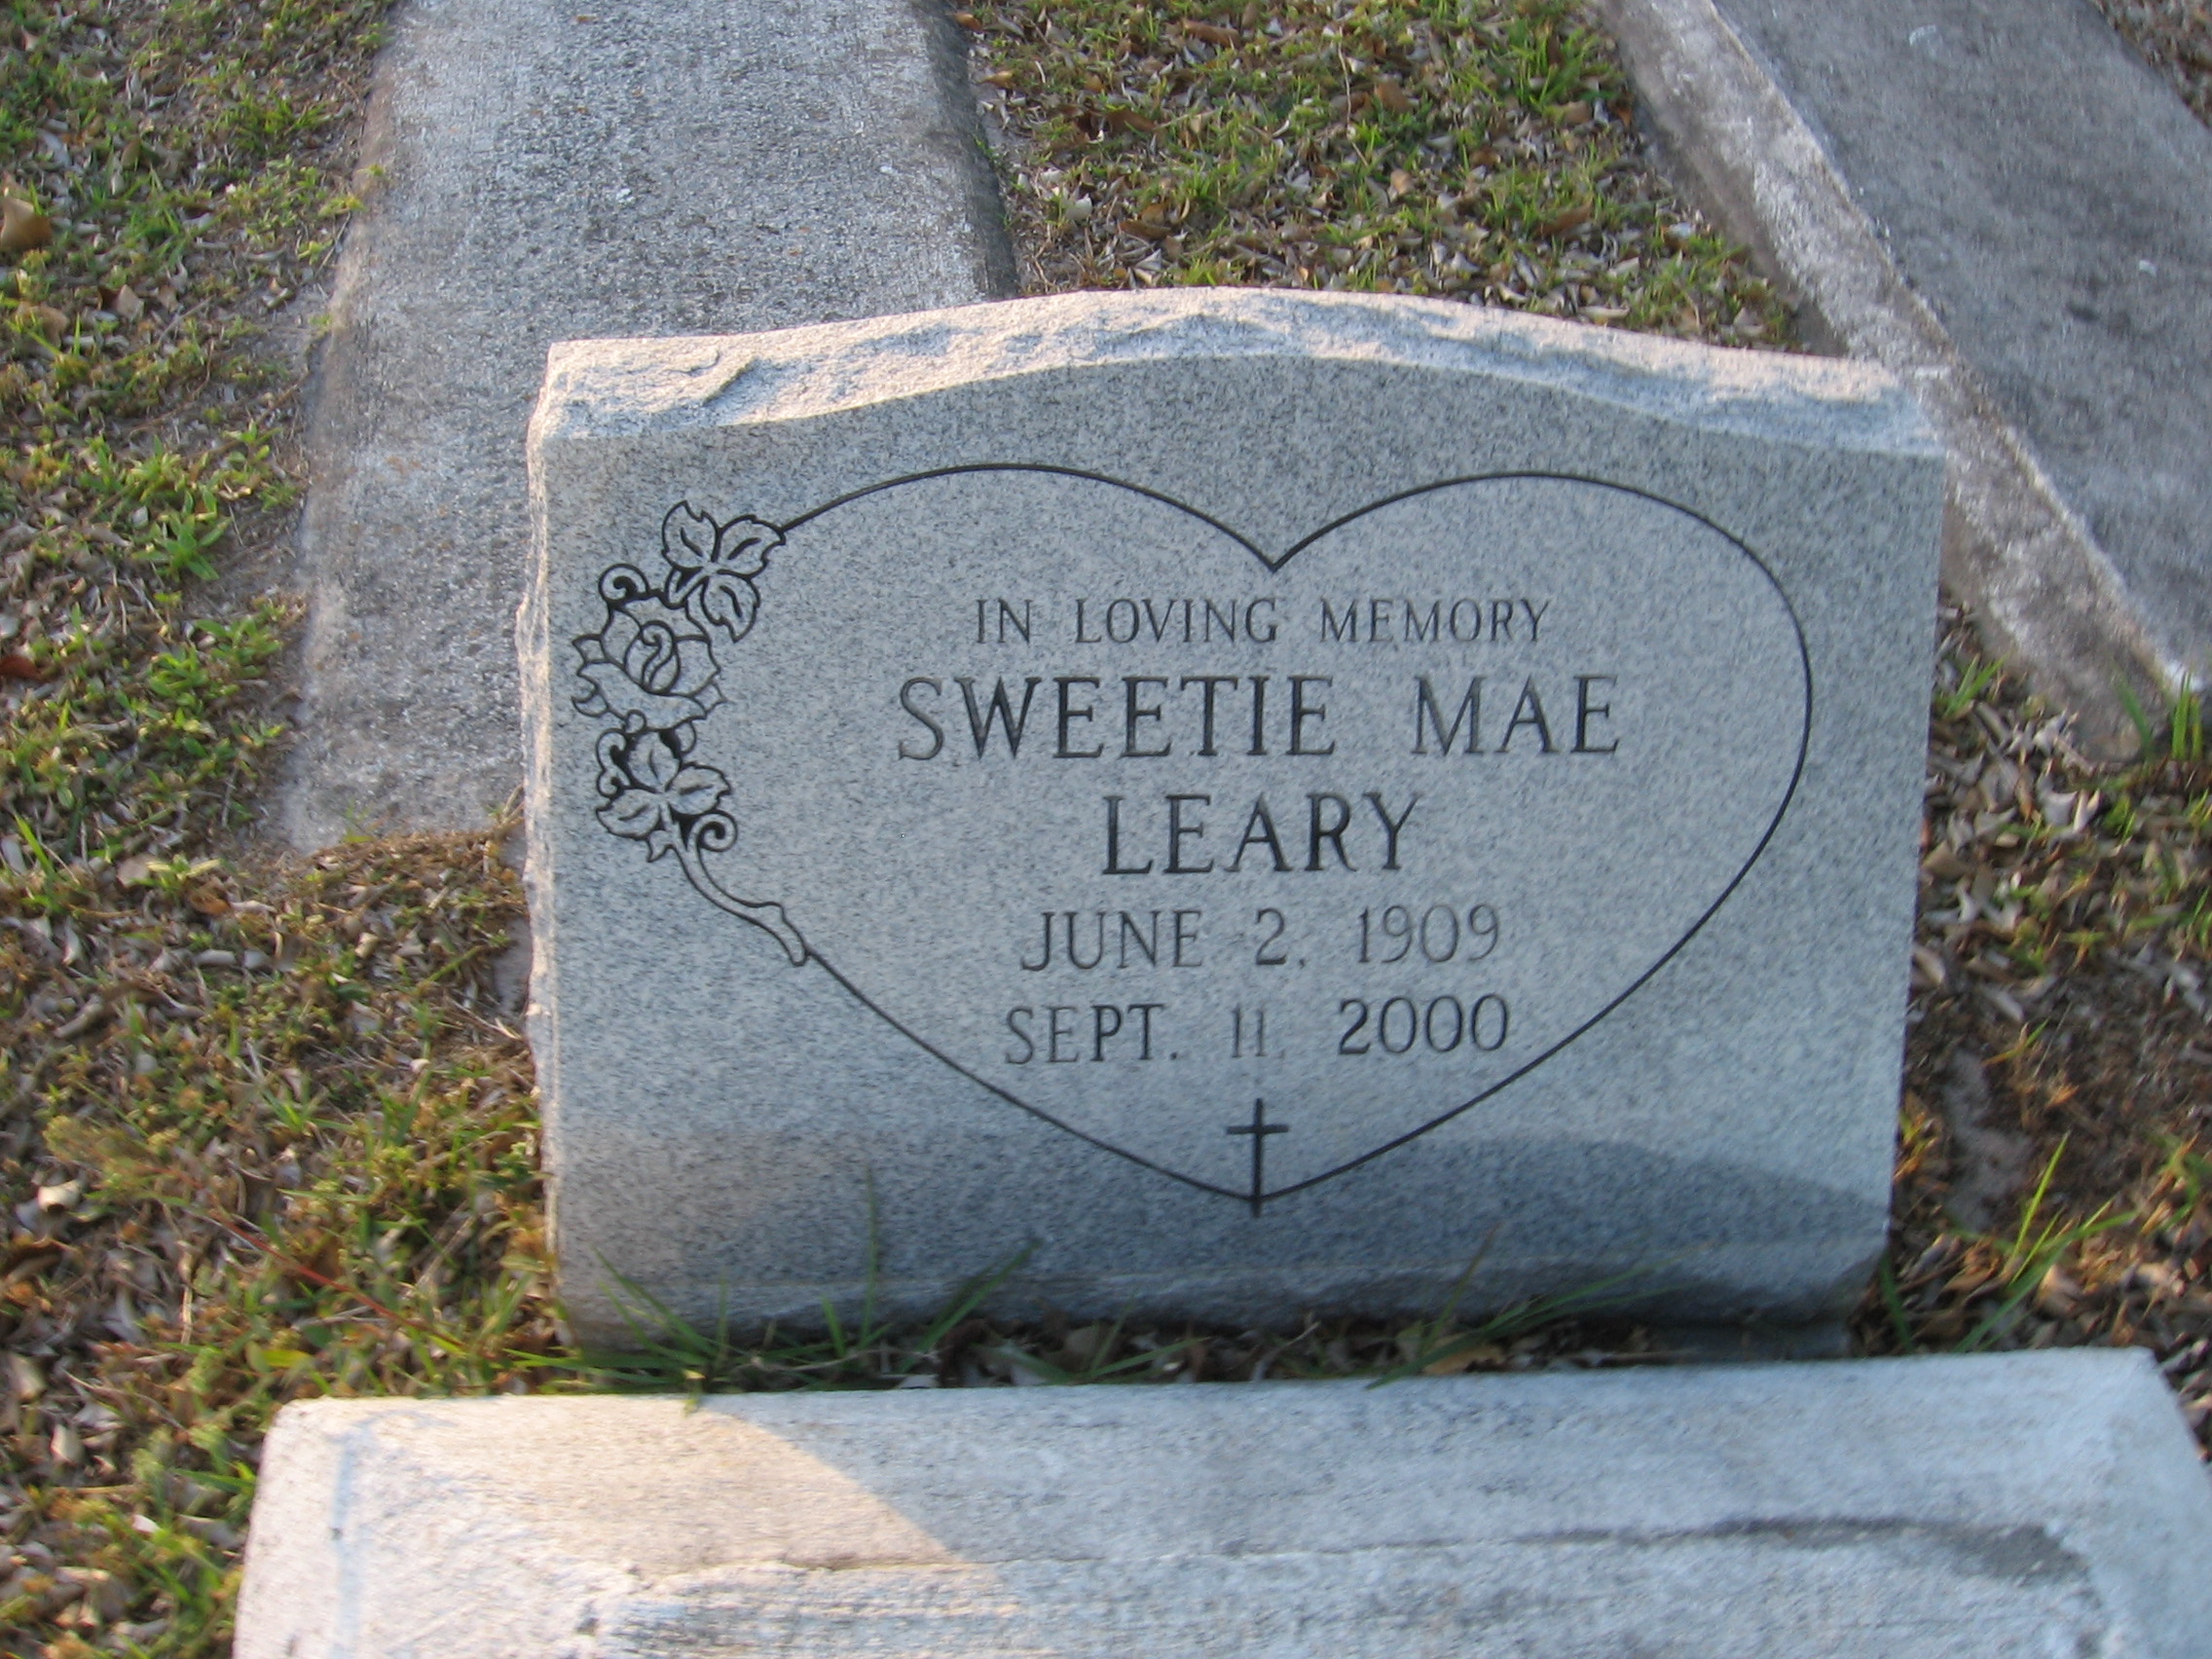 Sweetie Mae Leary